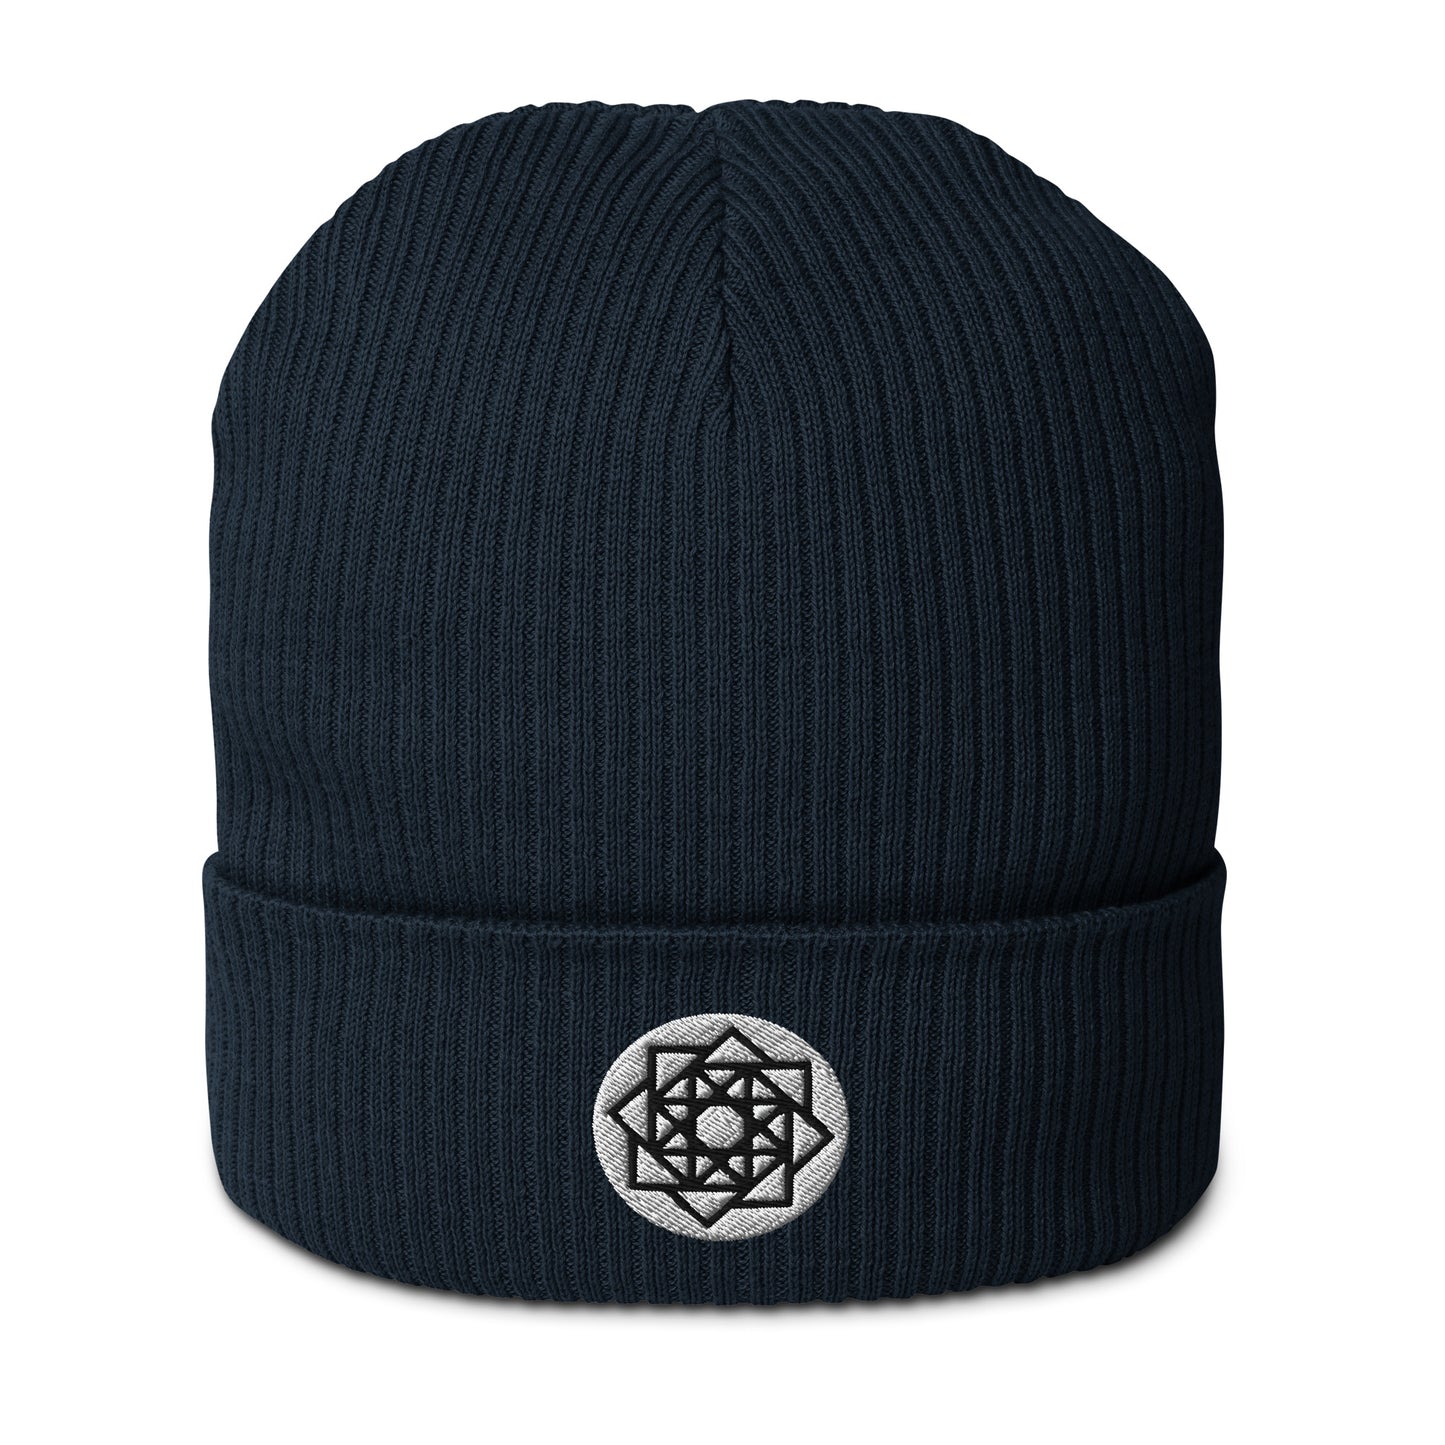 Allow me to introduce our Square Matrix Beanie in Oxford Navy, a testament to cosmic order and mathematical elegance. Woven from the finest organic cotton and adorned with the precise geometry of the Square Matrix symbol, this beanie transcends mere headwear.